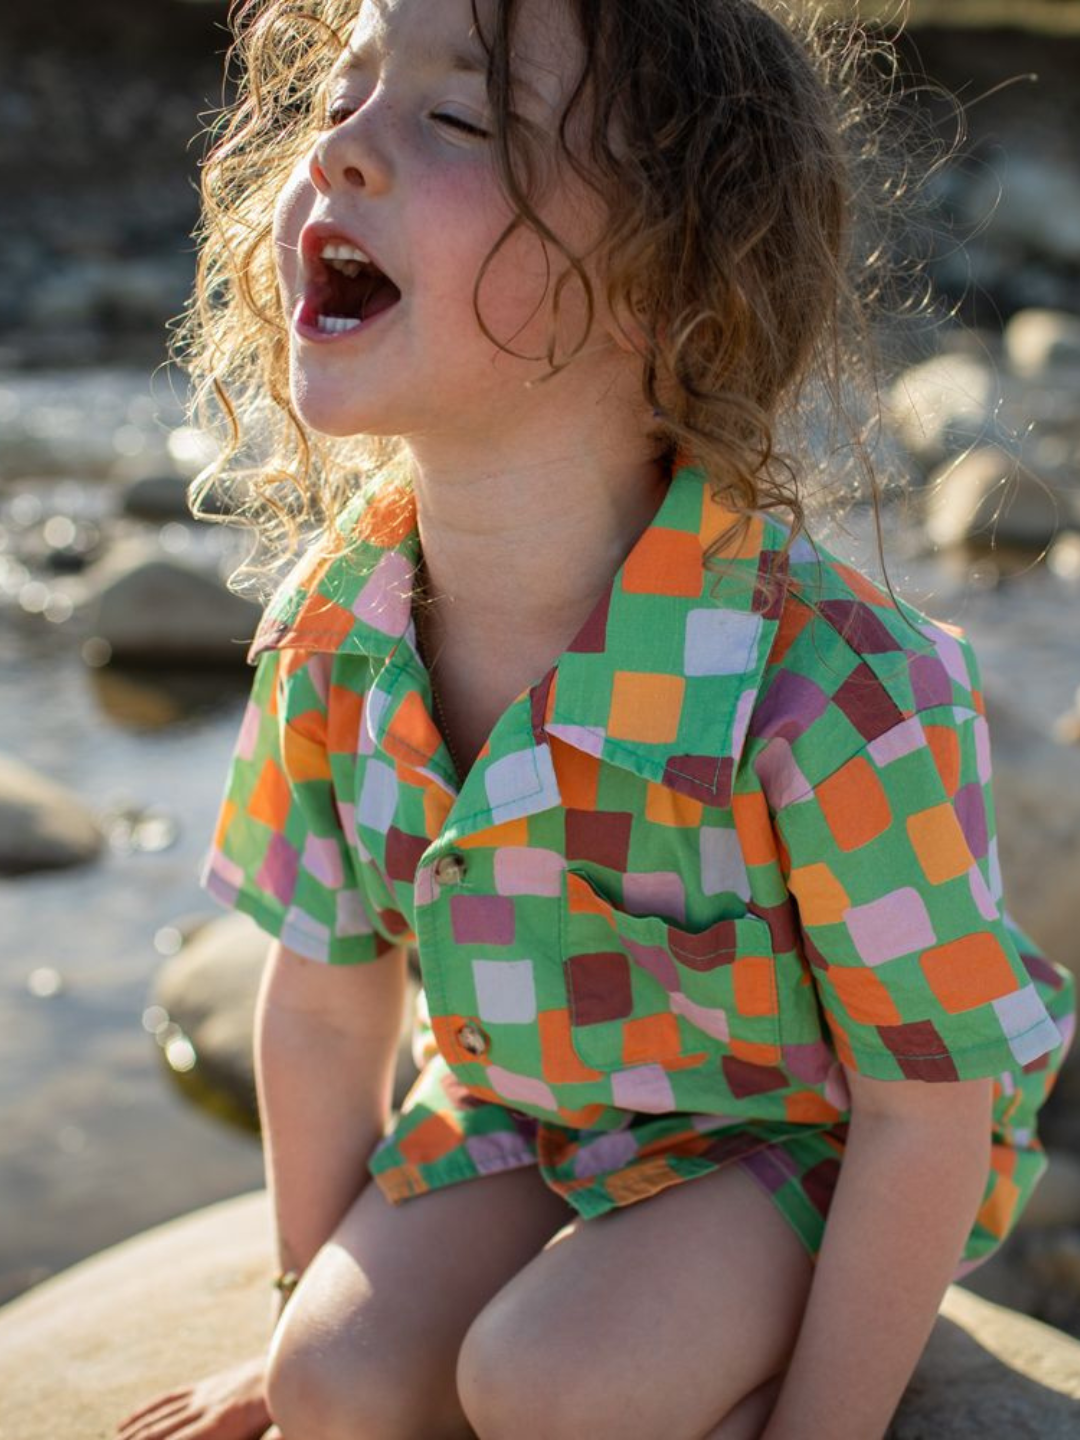 A child sitting on rocks, wearing a kids' shirt and shorts set in a pattern of purple, pink, gold and orange squares on a green background